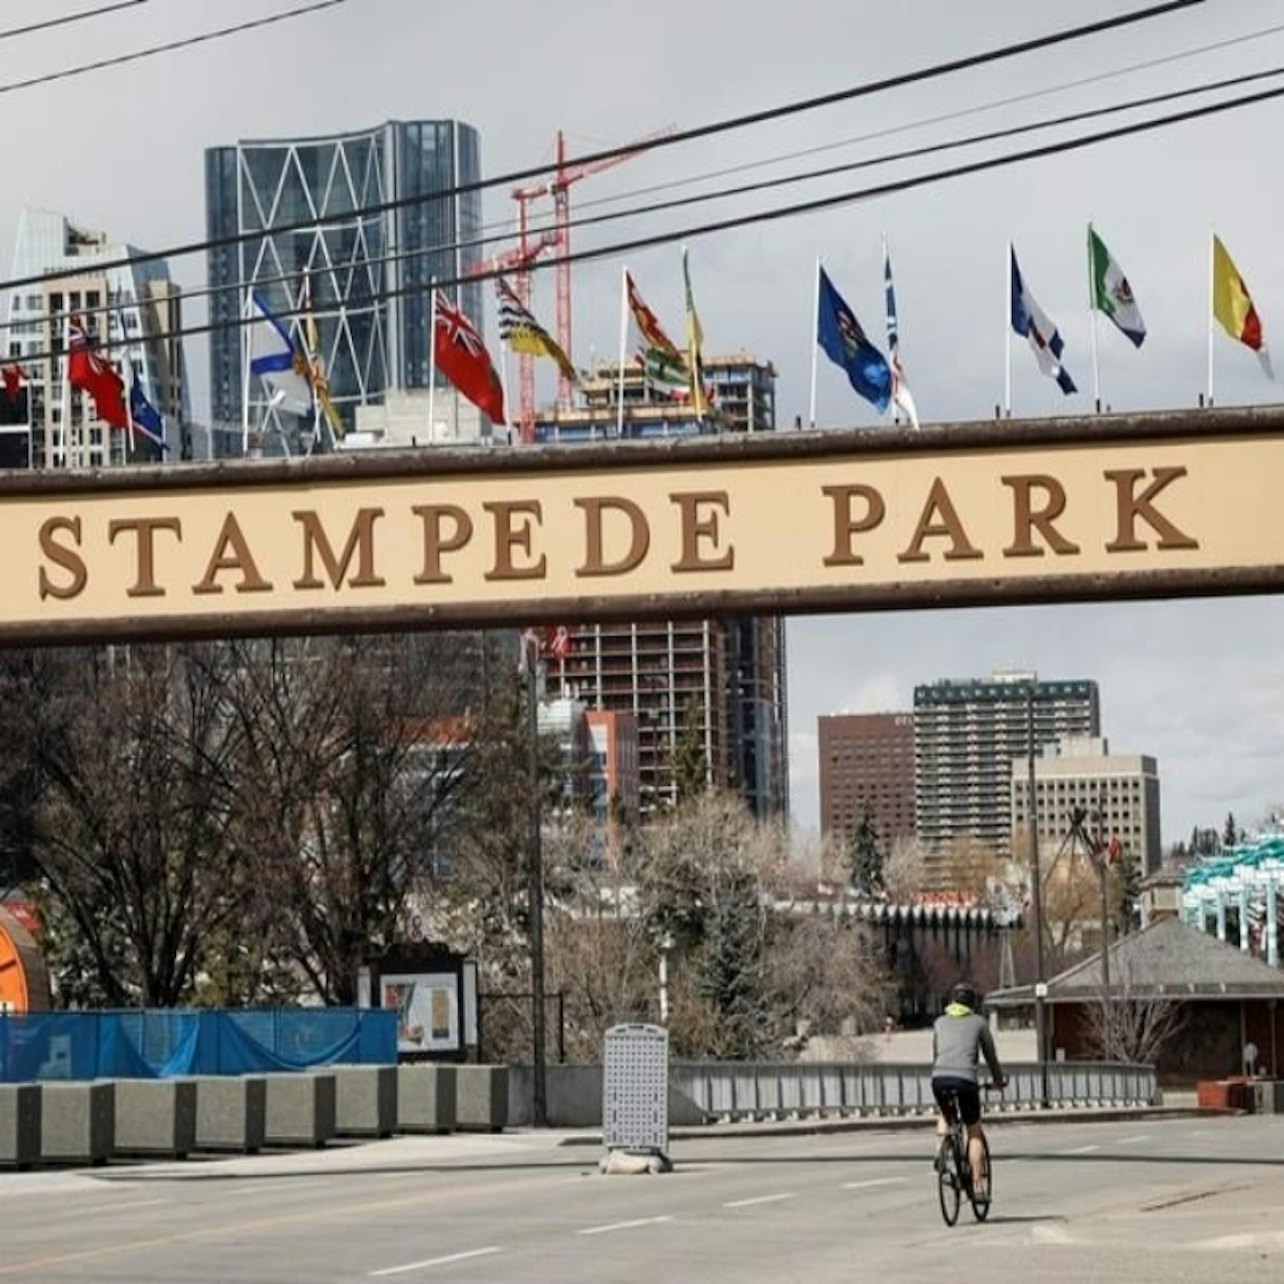 Calgary's Stampede Park: Art & the Wild West Walking Tour - Accommodations in Calgary